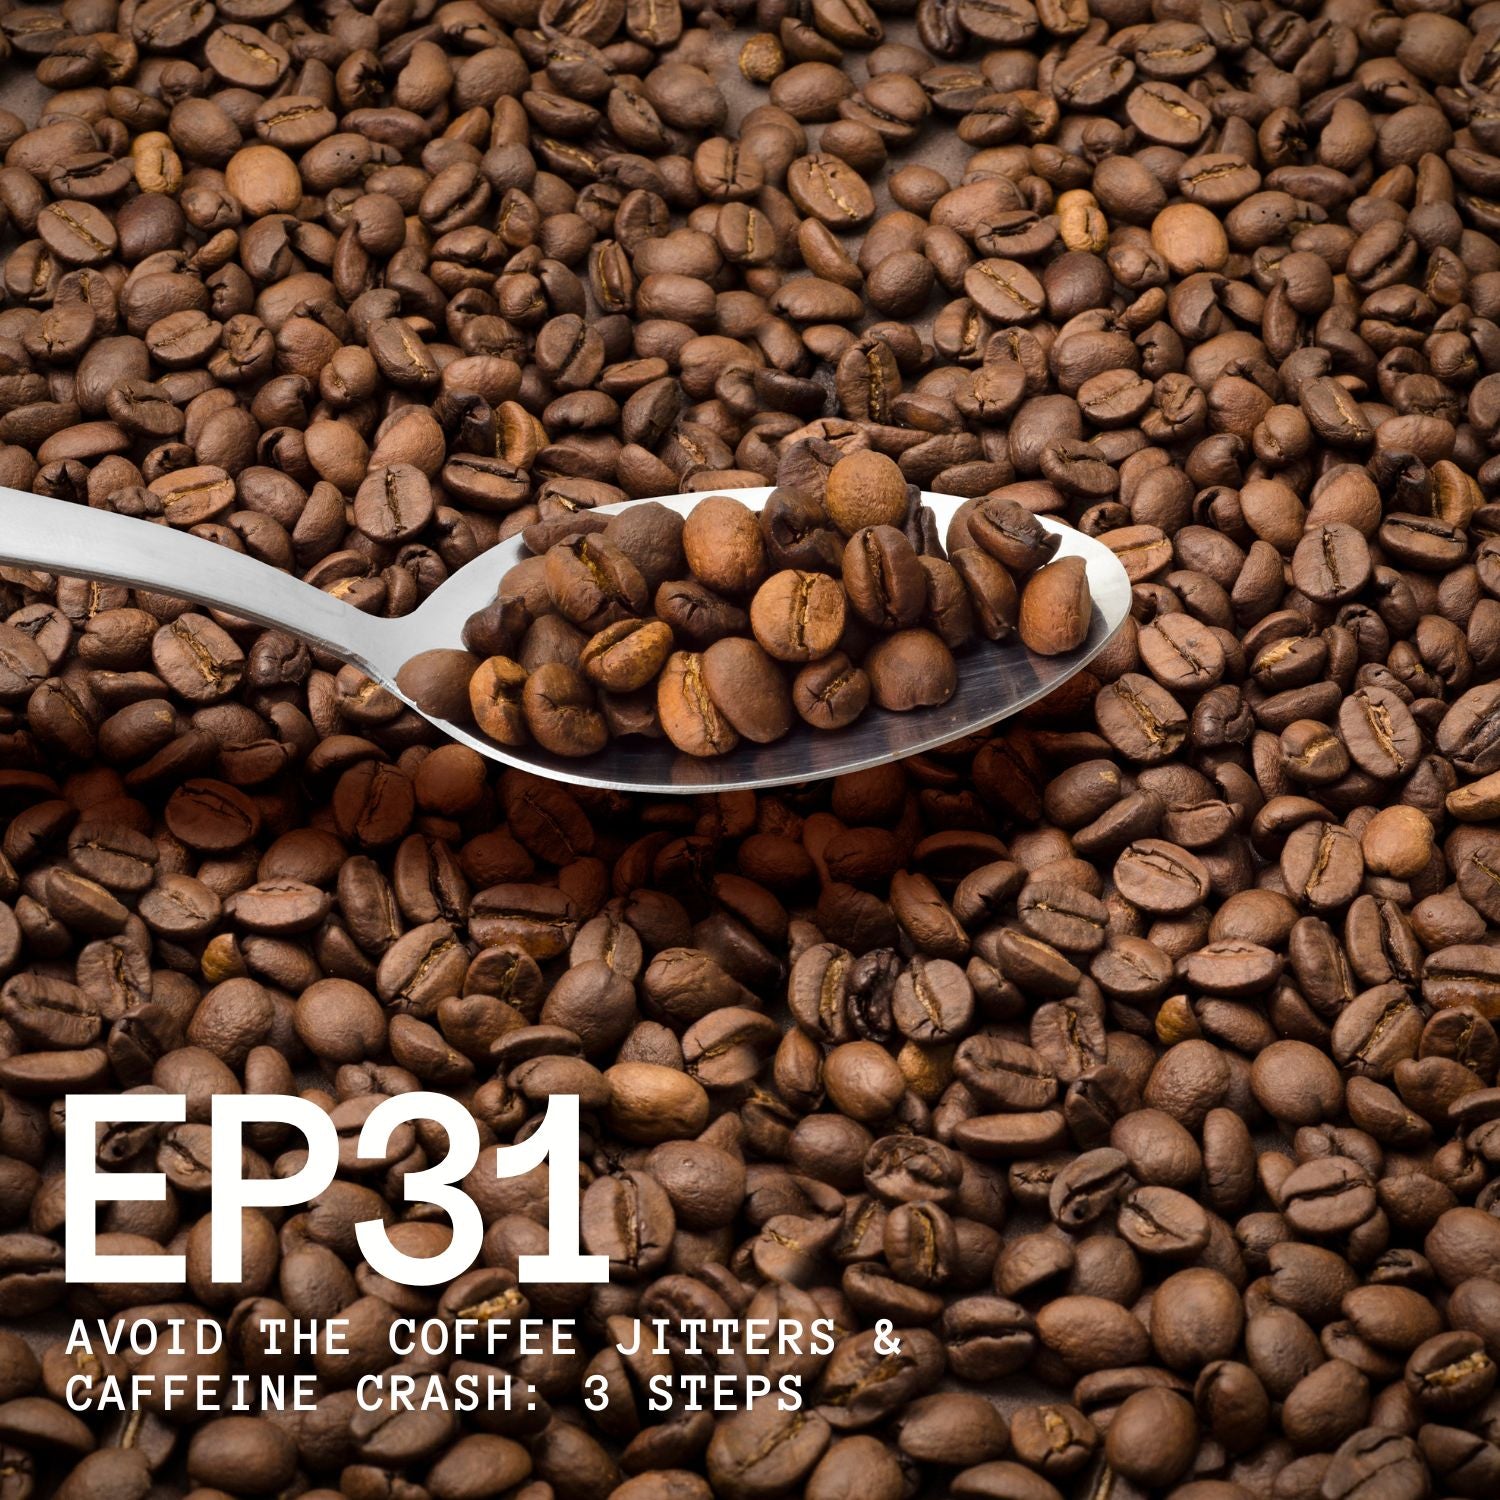 Episode 31- Three Simple Steps to Avoid Jitters and Caffeine Crash